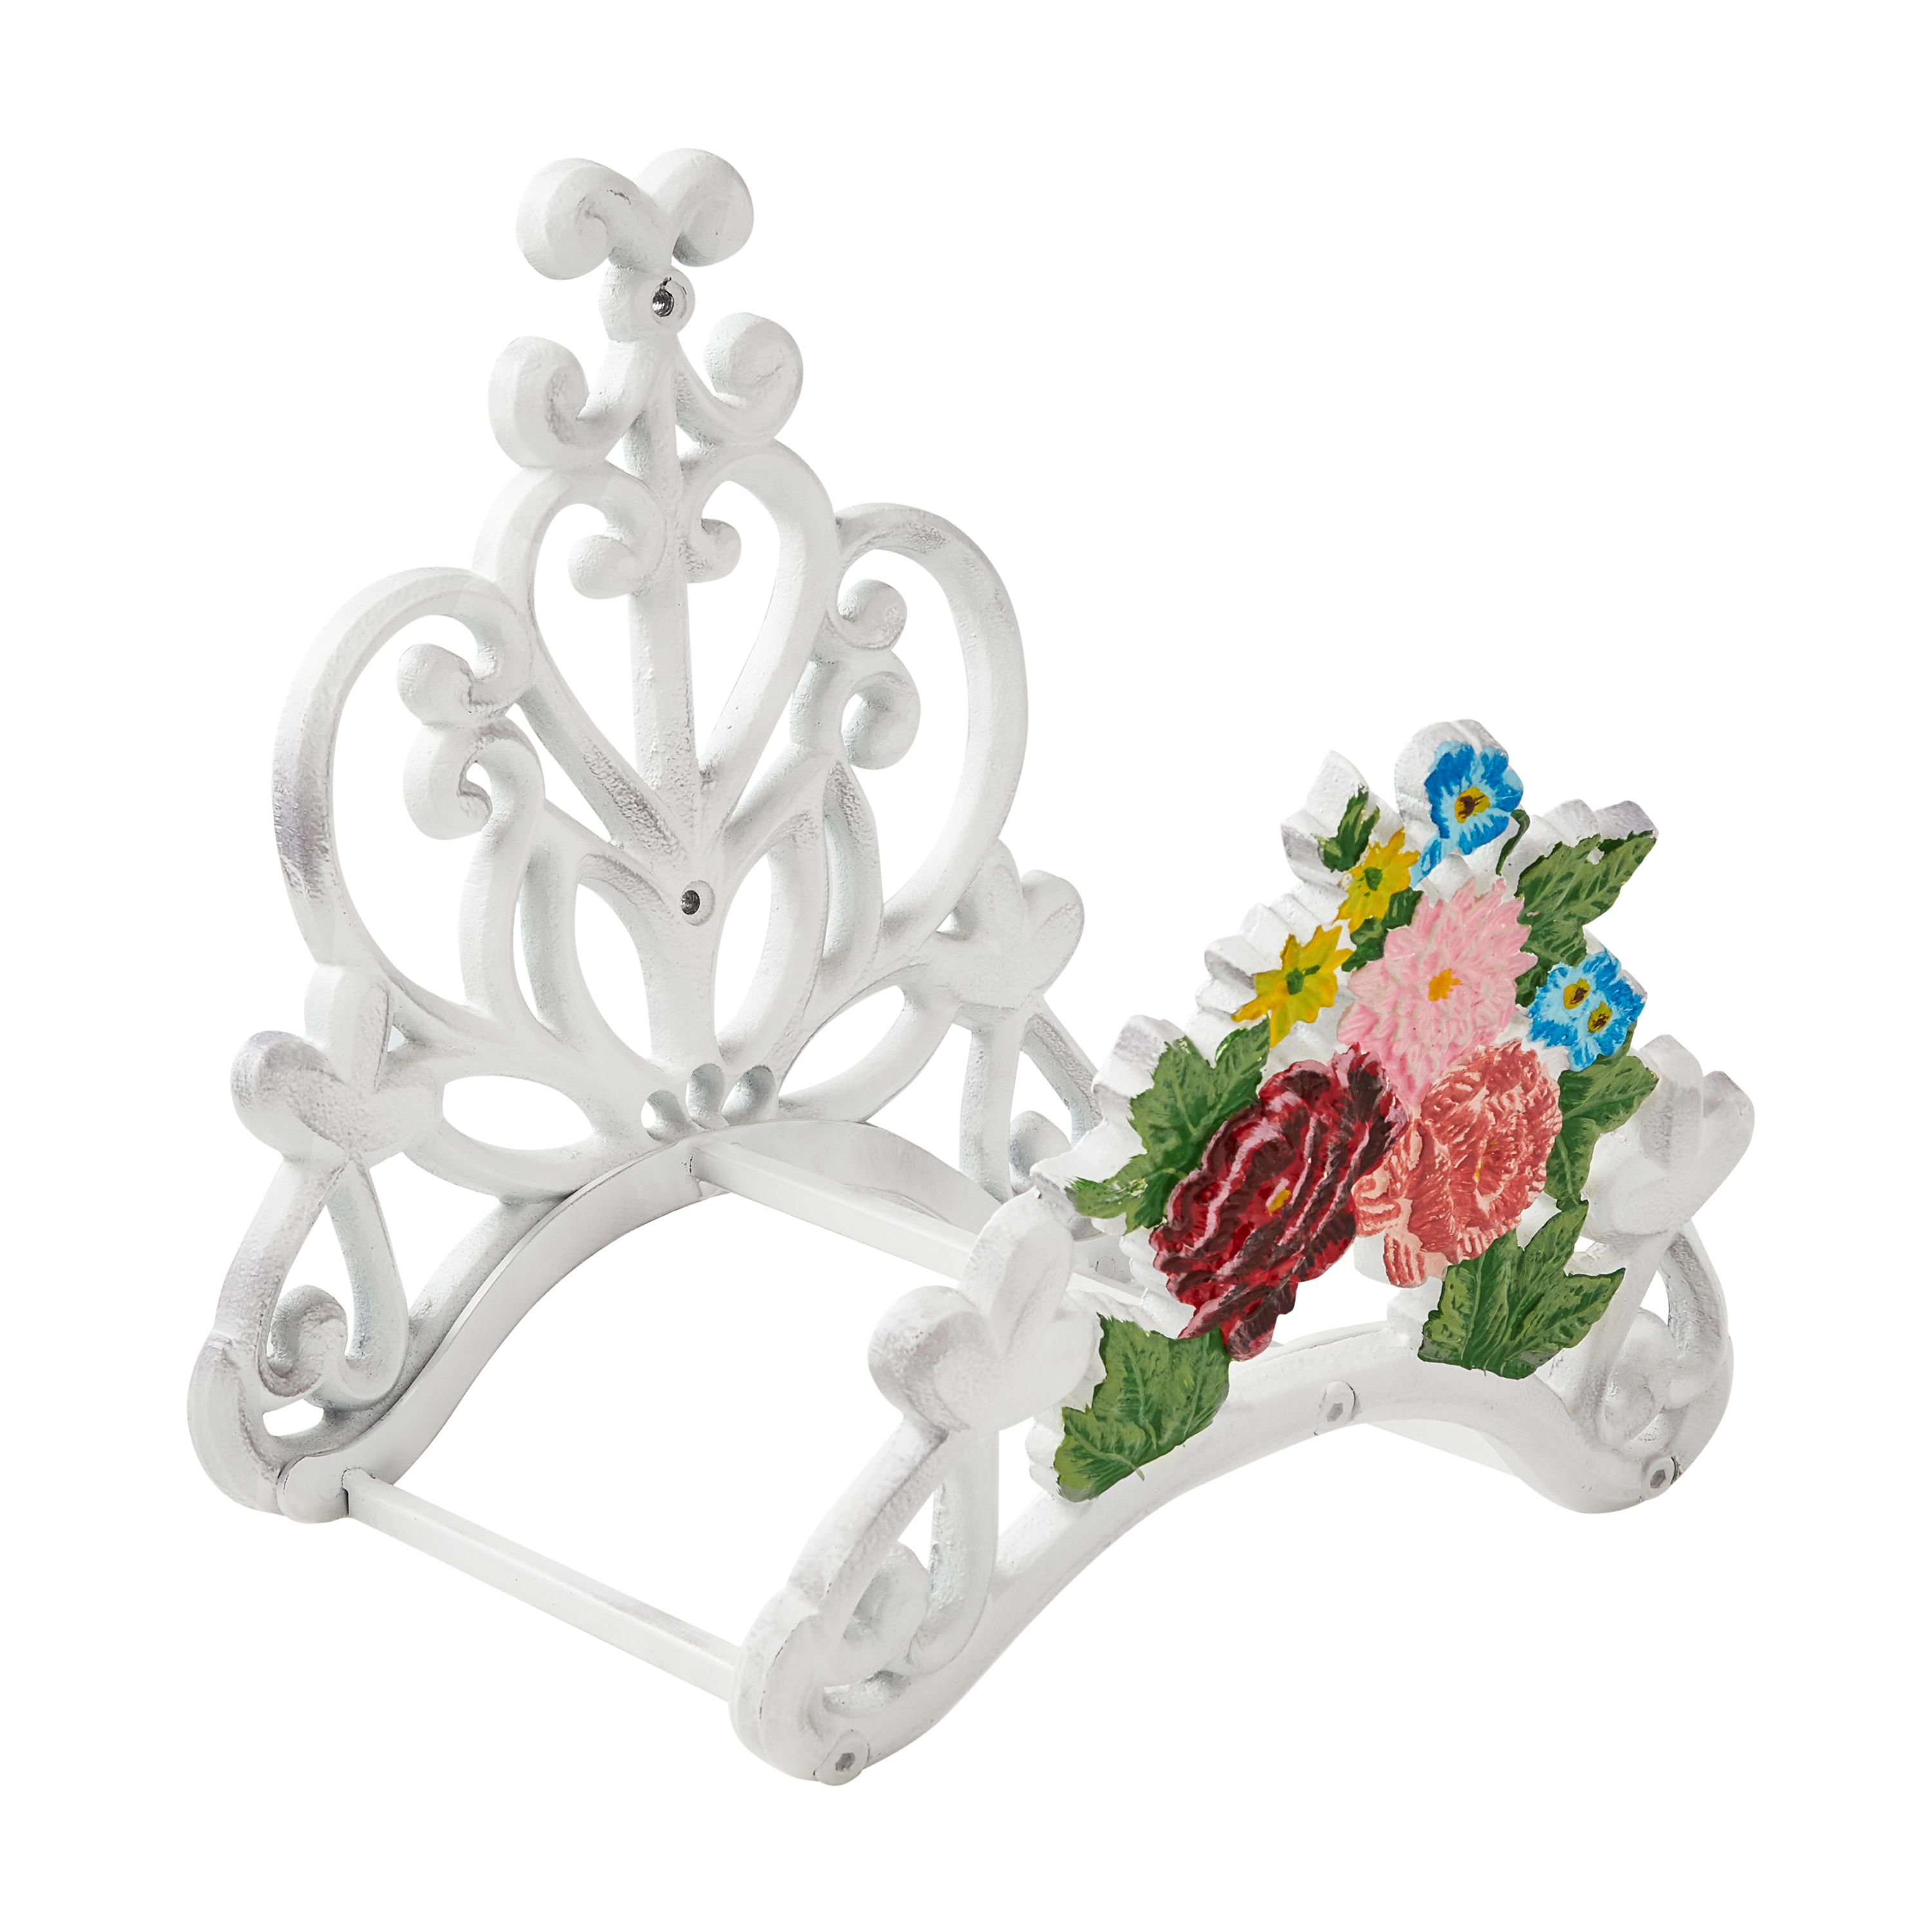 The Pioneer Woman Decorative Metal Floral Hose Hanger, White - image 4 of 7